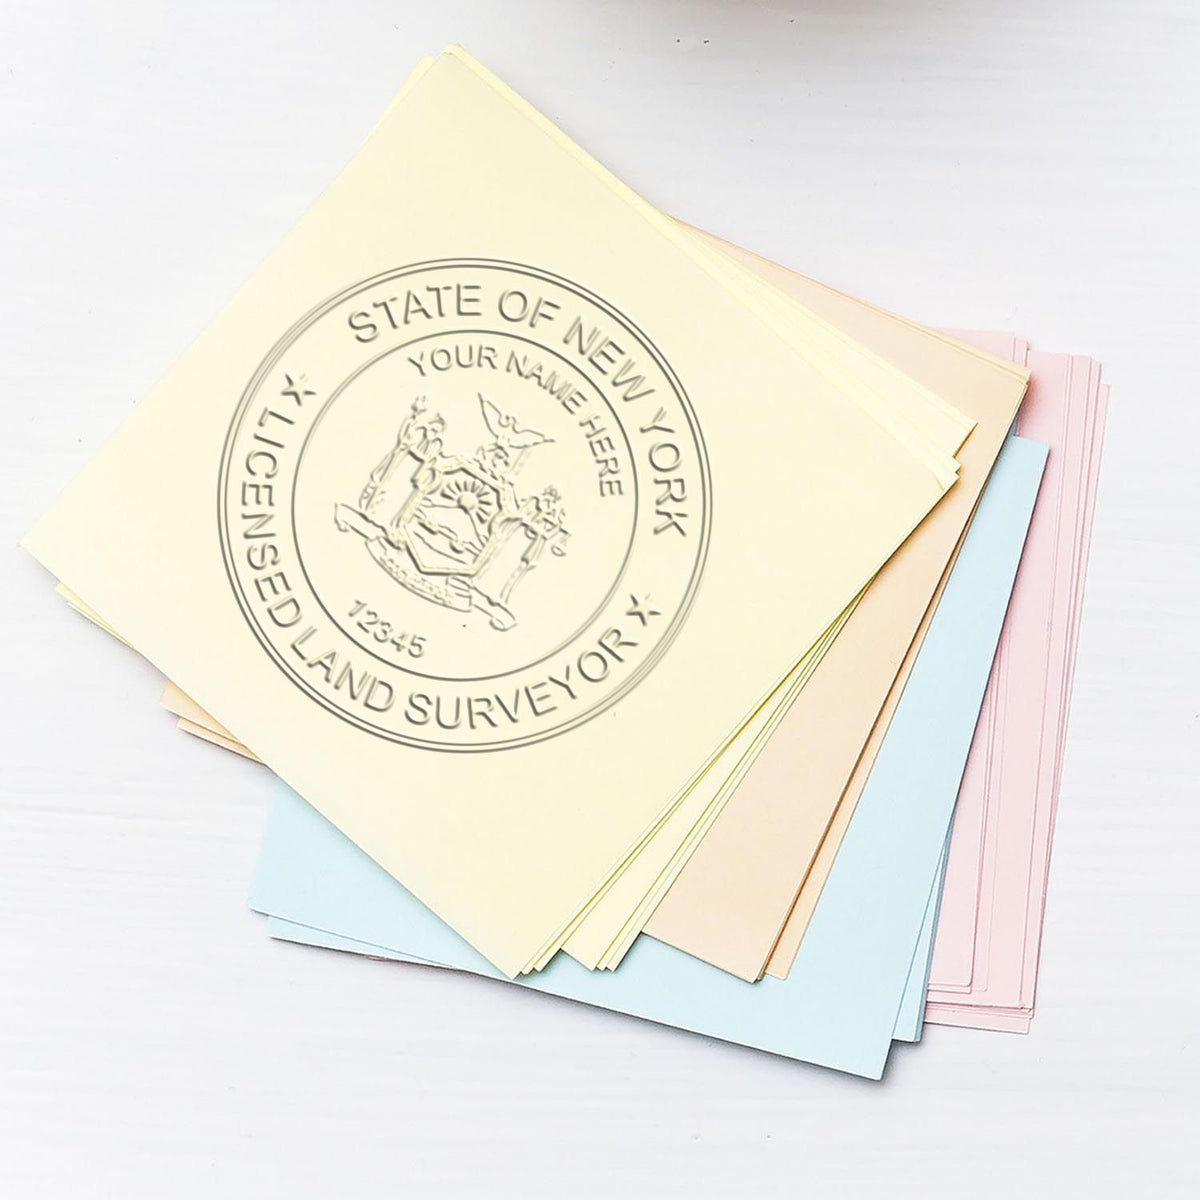 An alternative view of the Hybrid New York Land Surveyor Seal stamped on a sheet of paper showing the image in use